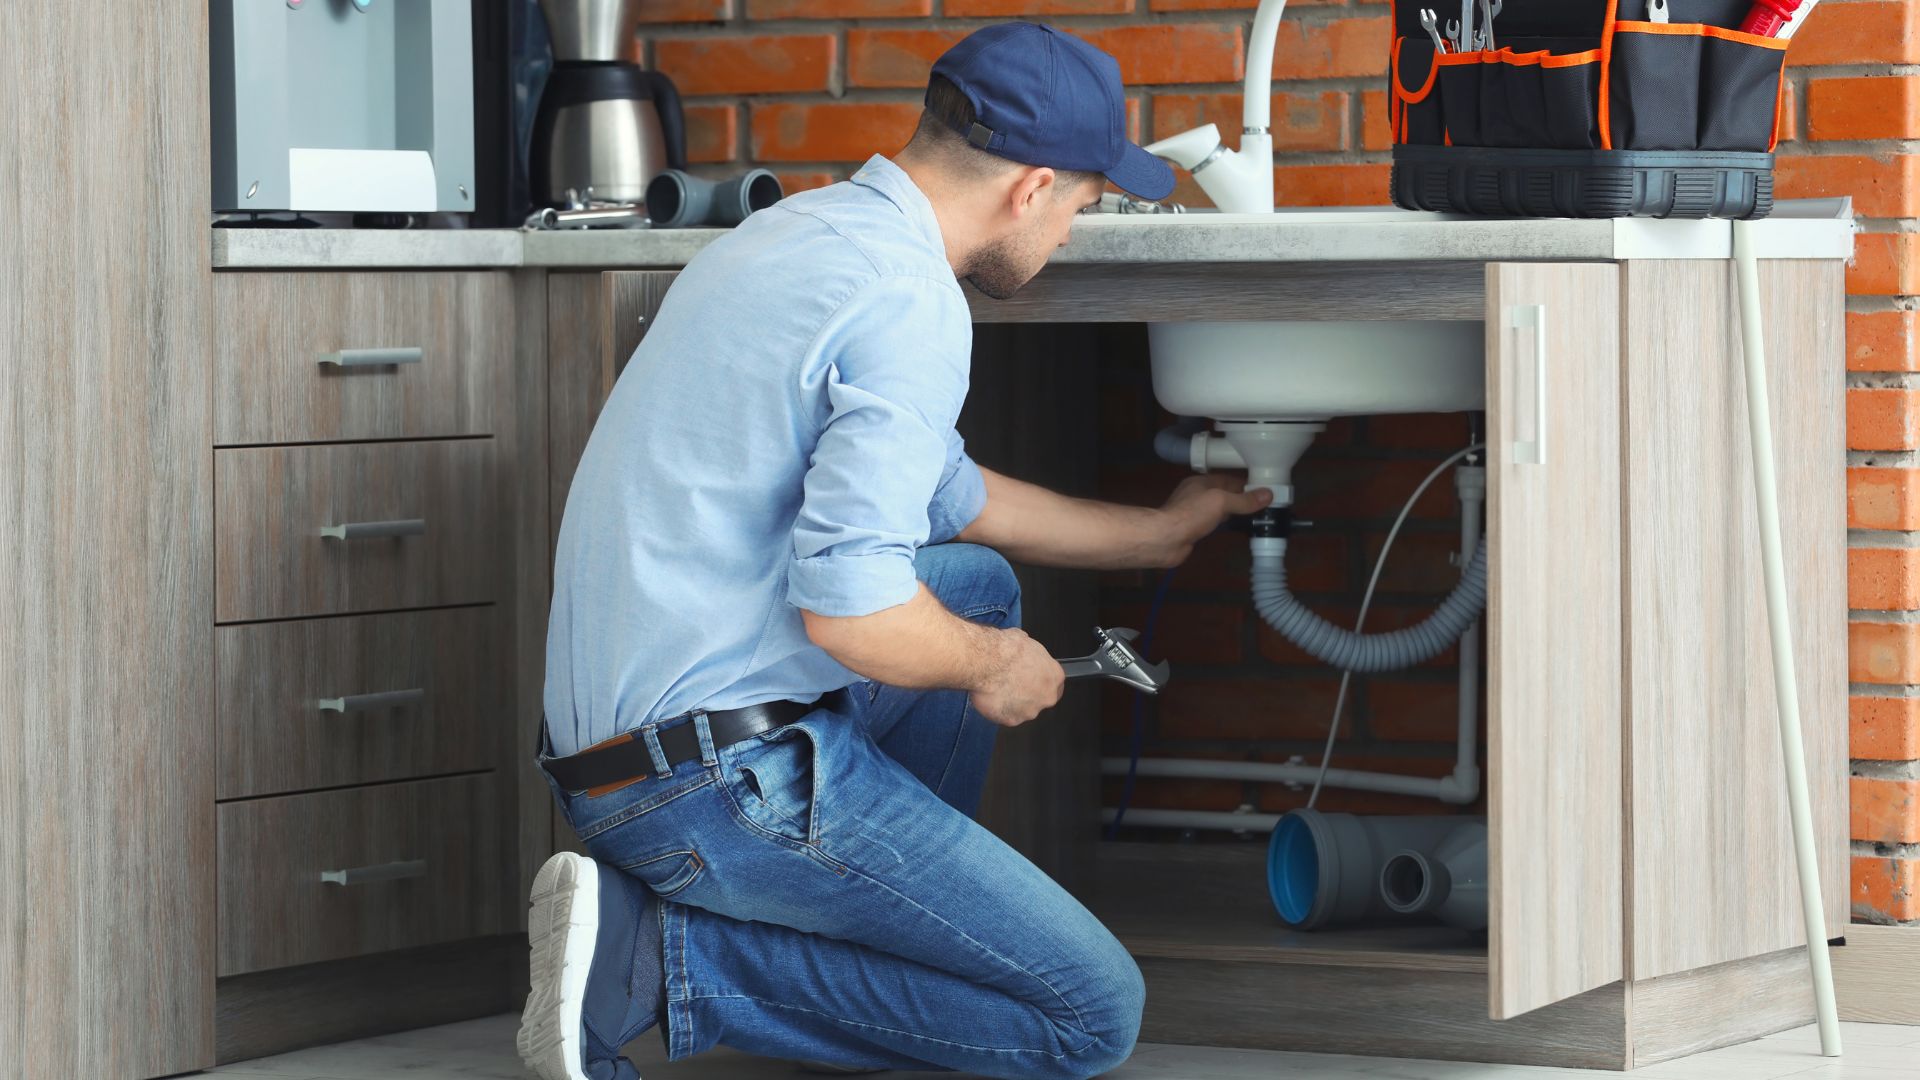 Reach out to CAN Plumbing and Drainage for all your kitchen requirements, where expert plumbers are ready to assist.